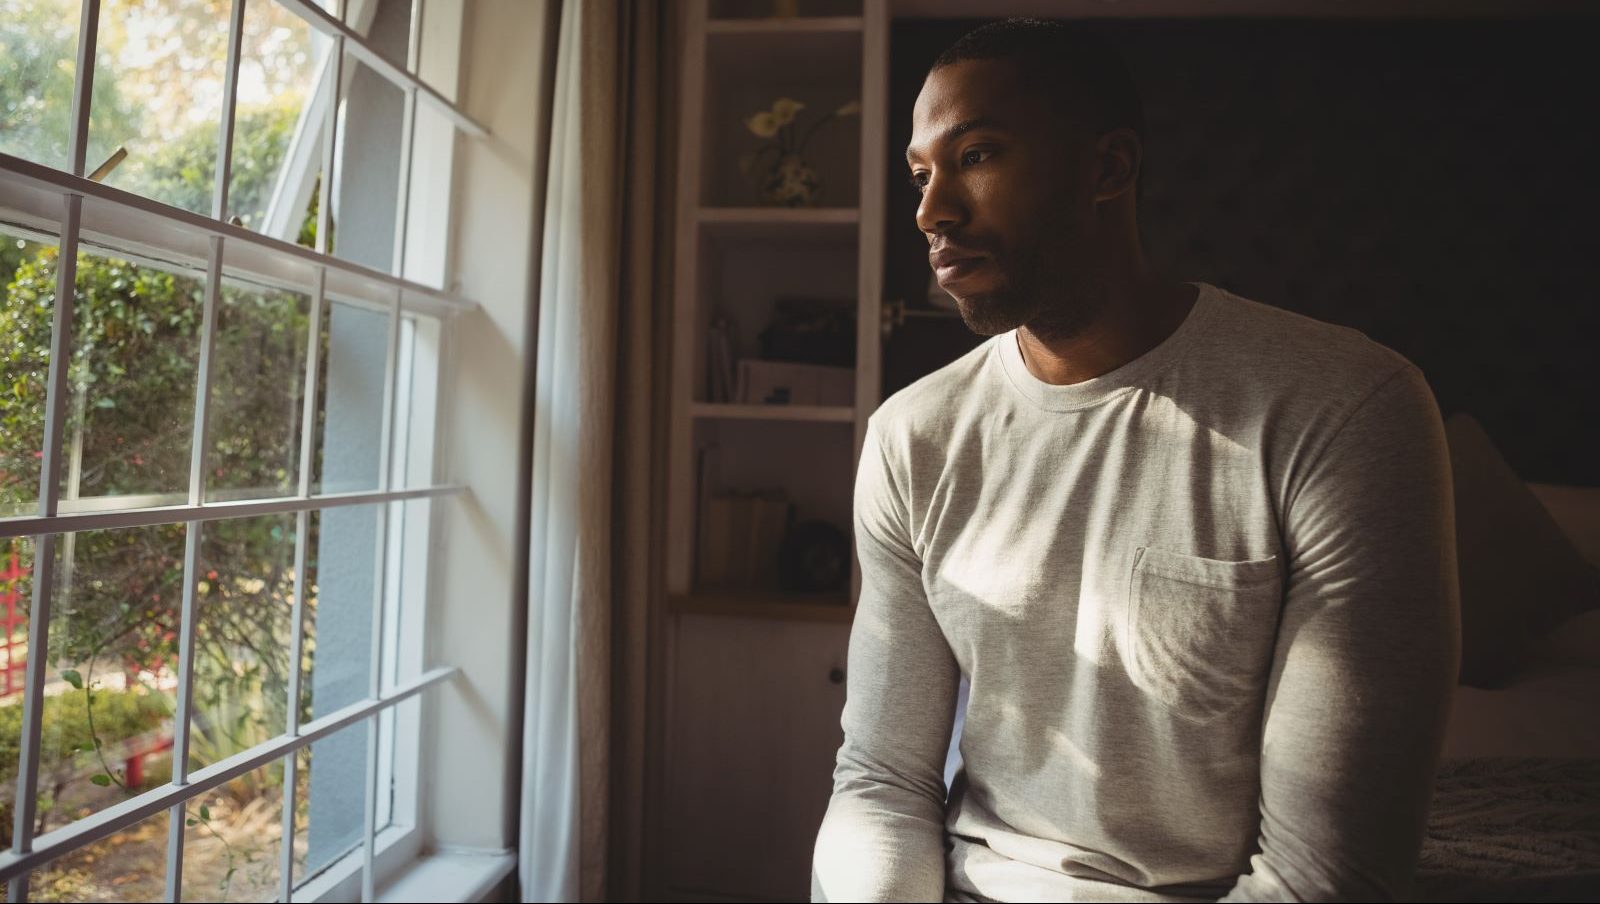 Depression and heart disease are a two-way street: If you have one, you’re more likely to have the other. What do men need to know?